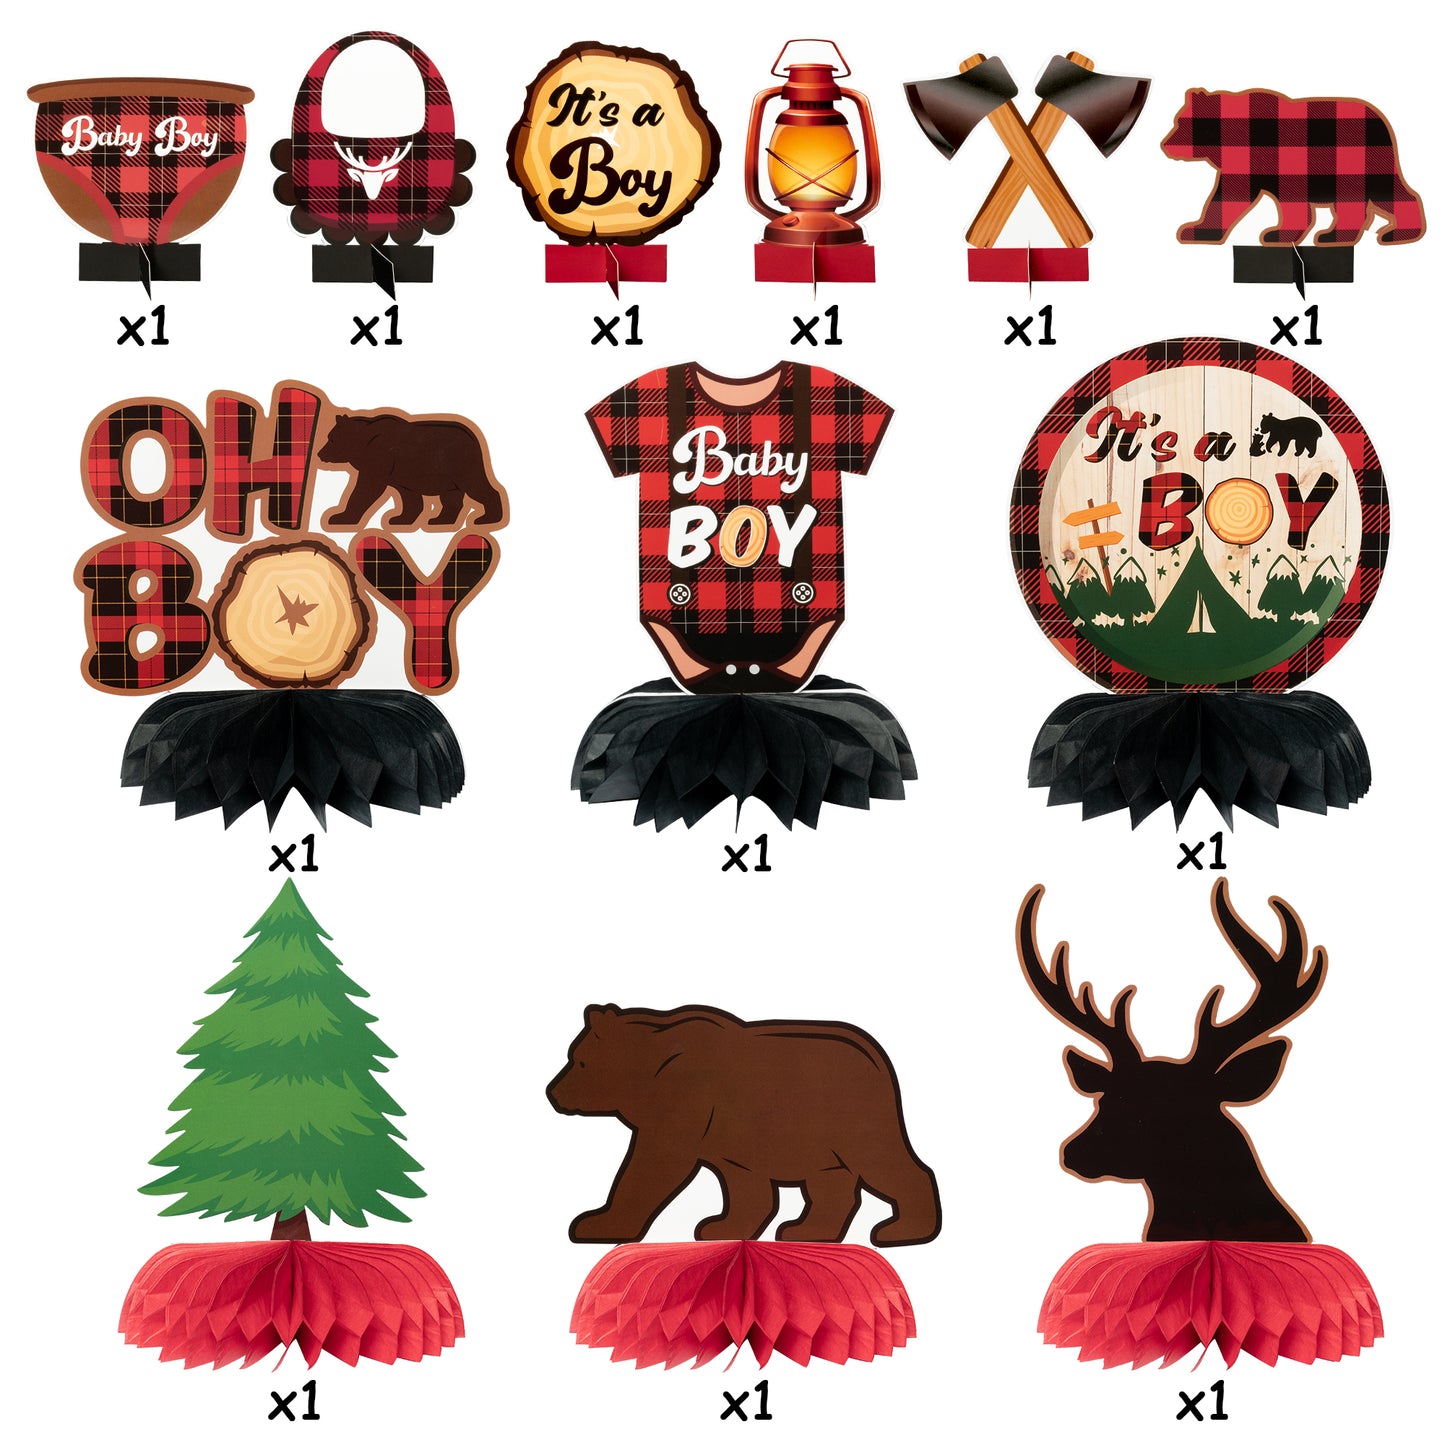 G1ngtar 12Pcs Lumberjack Baby Shower Party Honeycomb Centerpieces for Baby Boys Red Buffalo Plaid It’s a Boy Table Toppers Adventure Themed Gender Reveal Party Decoration Supplies Photo Booth Props